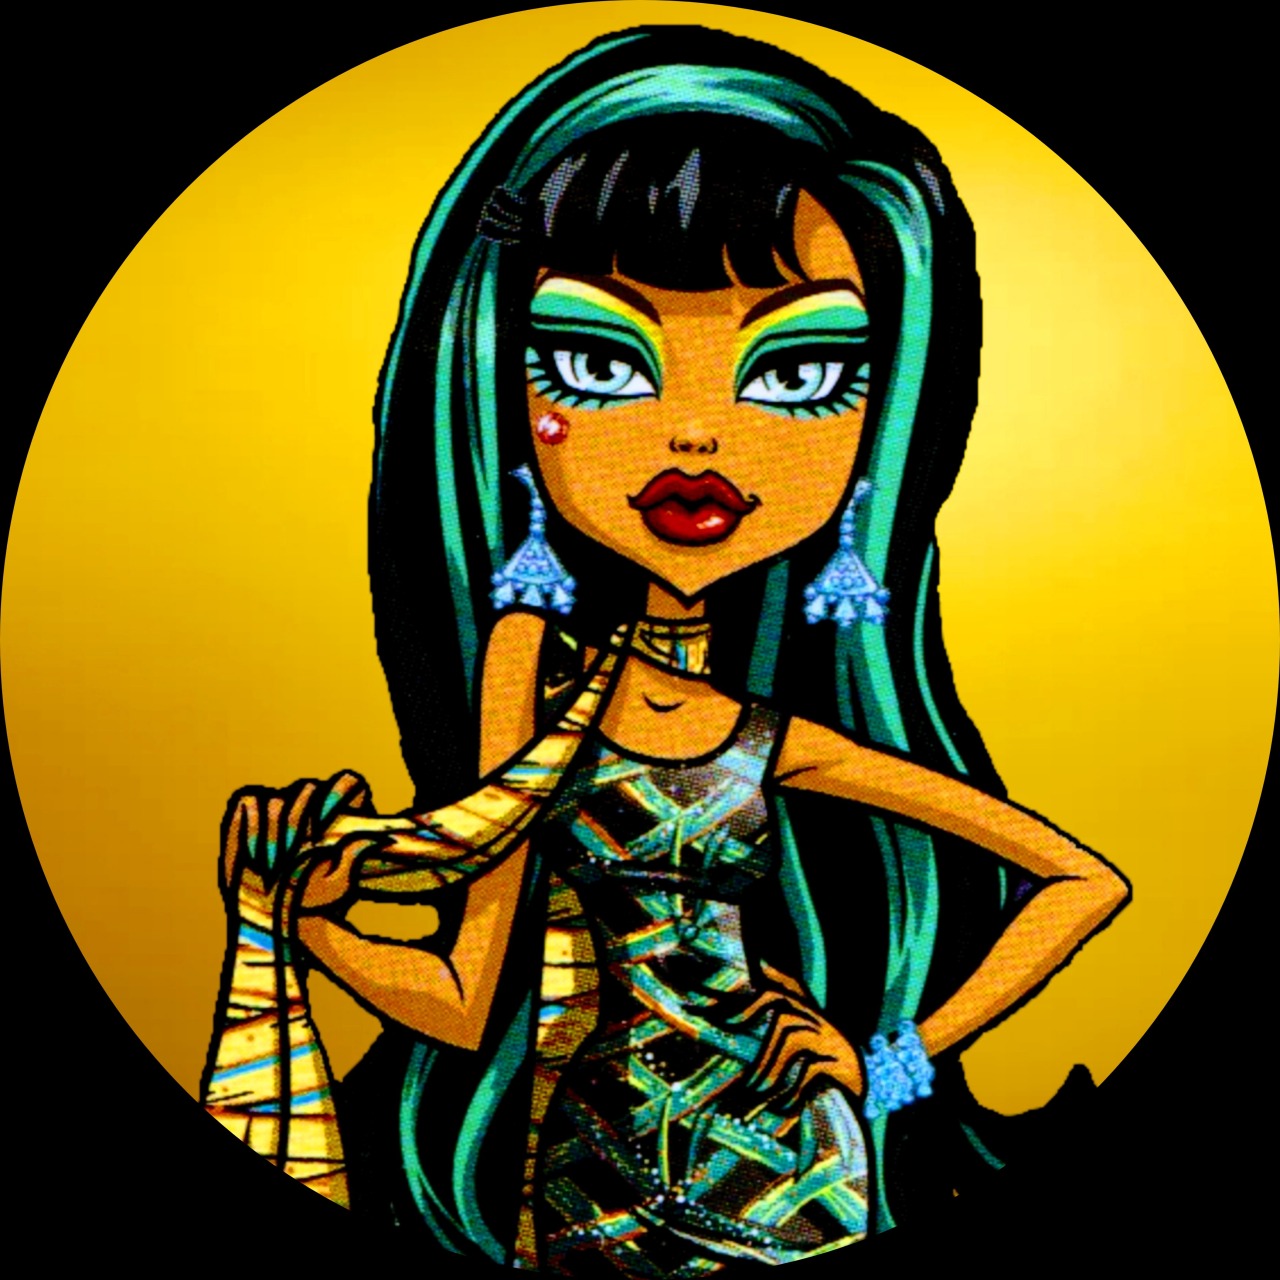 Monster High Icons (Close-up)Like and/or reblog if you save/use #monster high #scaris: city of frights  #cleo de nile #lagoona blue#sparkly#glitter#close-up#icons#circle icons #icons by me